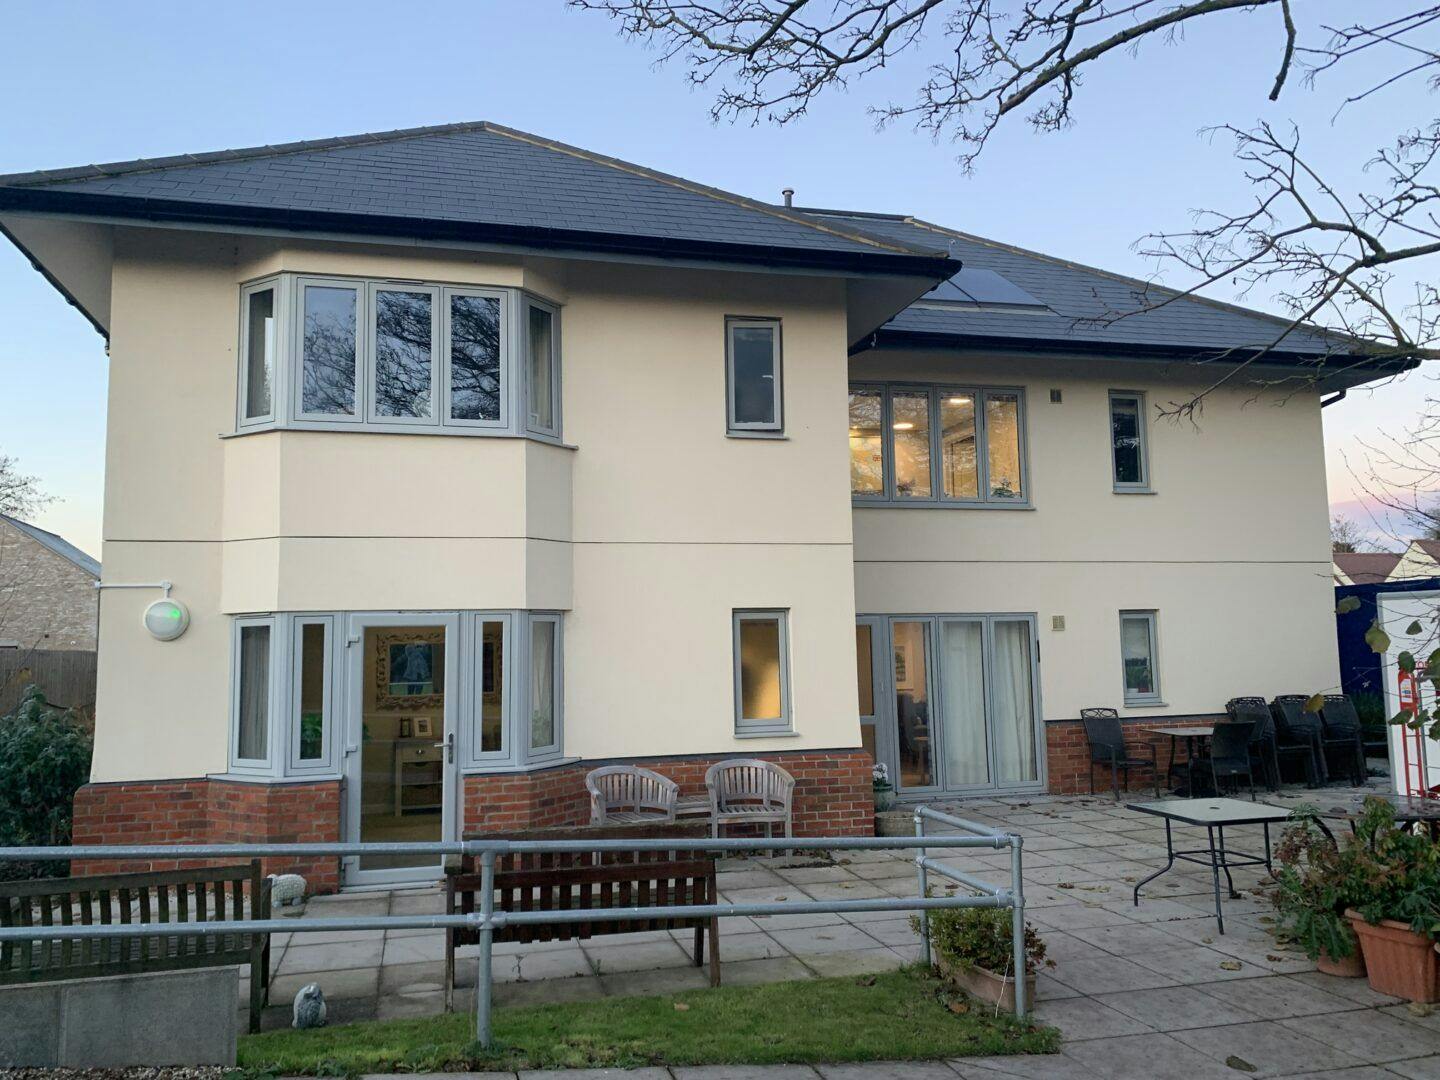 Exterior of Maycroft Care Home in Royston, North Hertfordshire